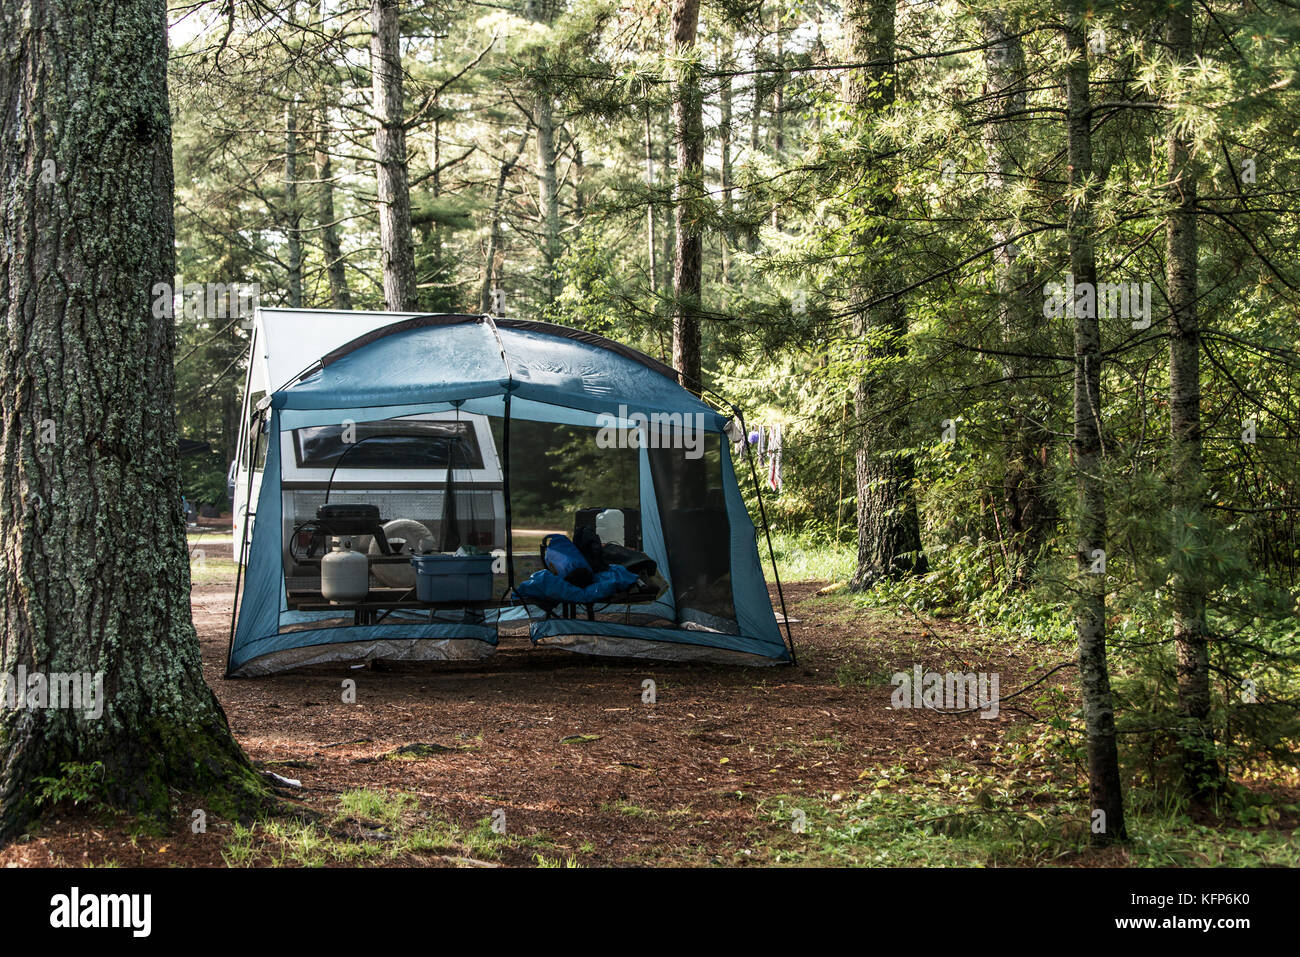 Lake of two rivers Campground Algonquin National Park a Beautiful natural forest landscape Canada tent camper Stock Photo